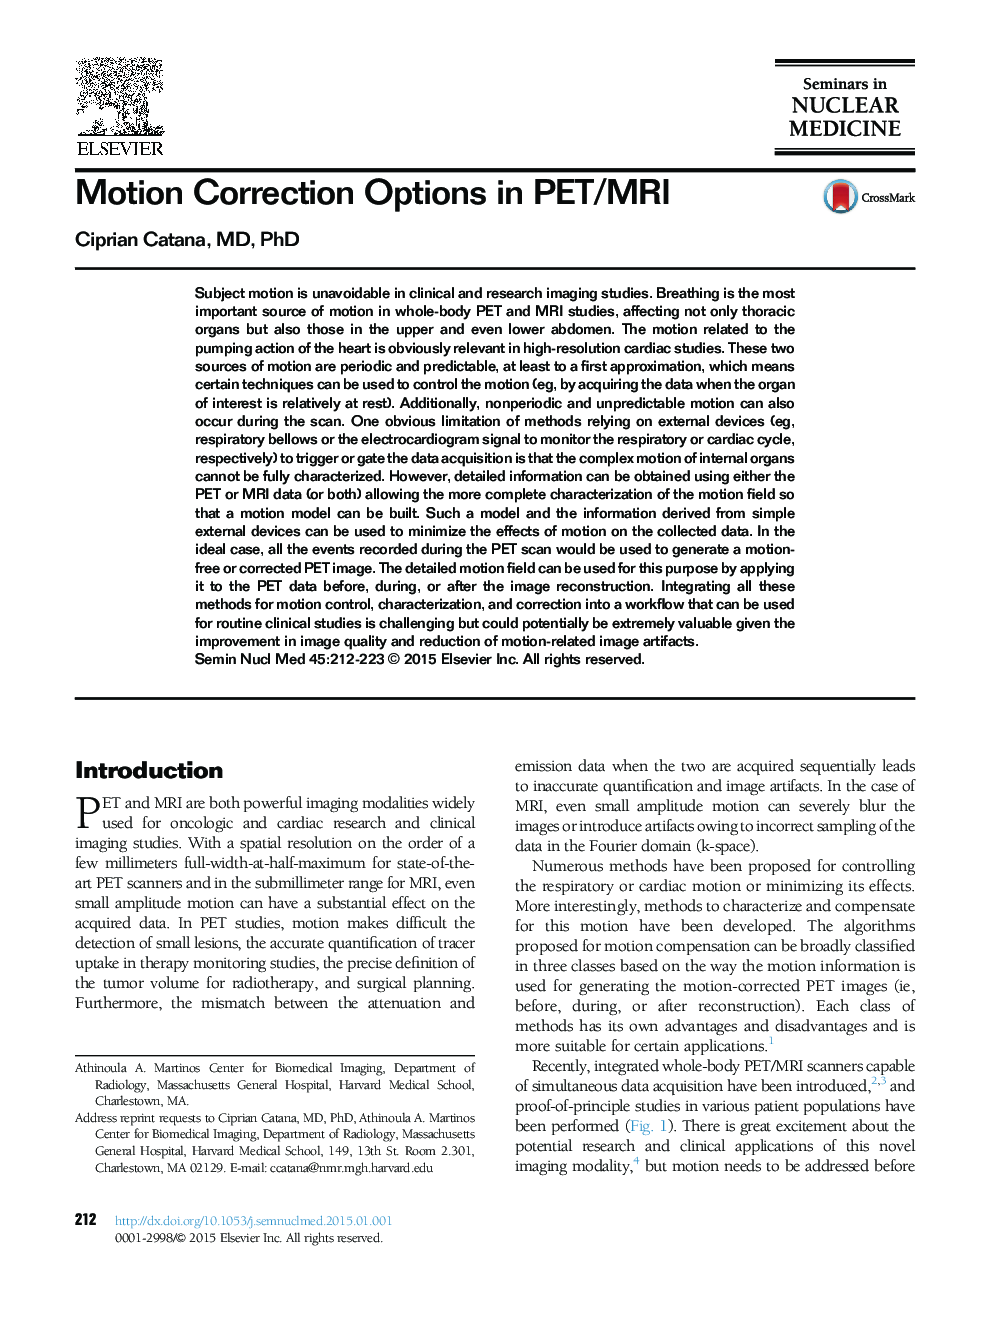 Motion Correction Options in PET/MRI